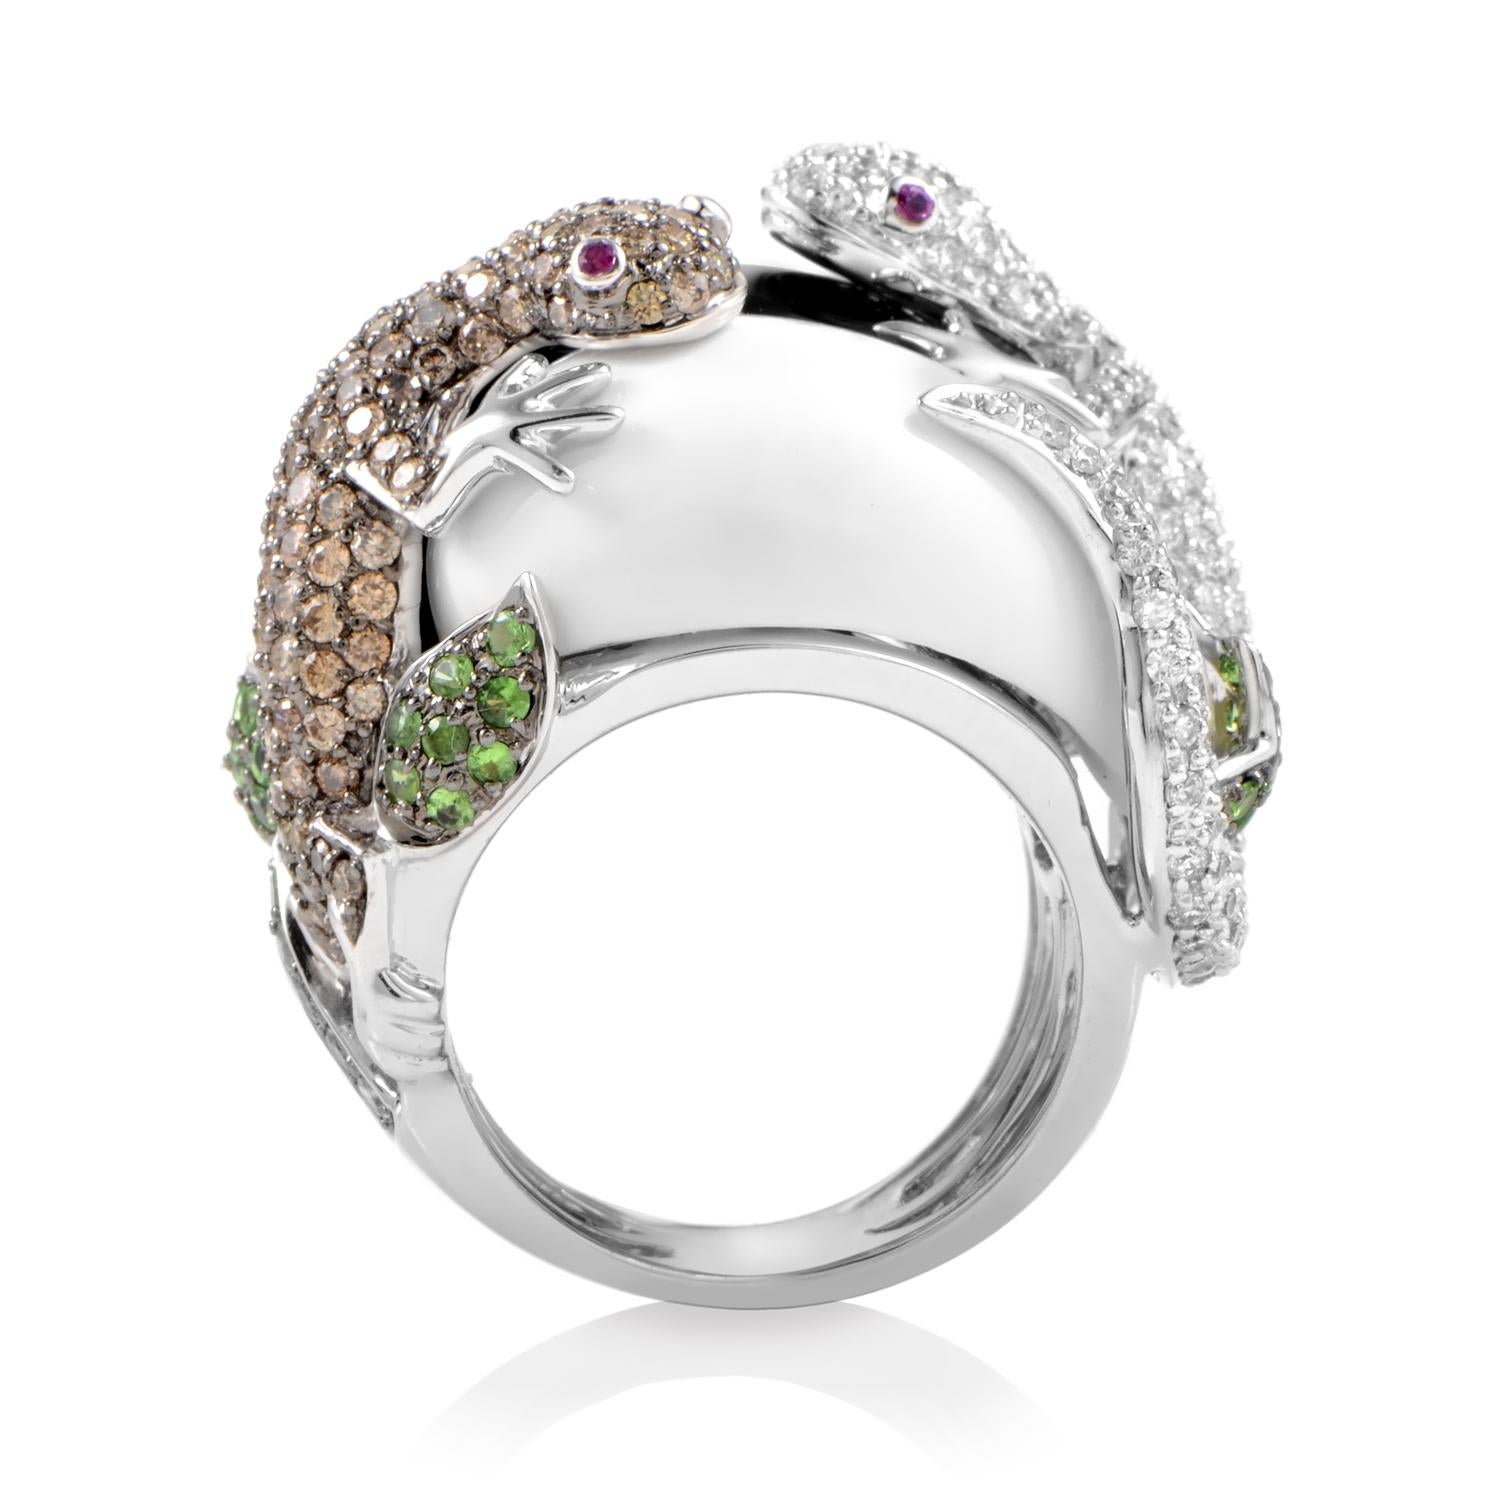 Creating an intriguing sense of duality by blending the tastefully opposing white and black onyx, this extraordinary 18K white gold ring also boasts decorations in the form of adorable geckos adorned with 0.72ct of tsavorites and 2.21 carats of